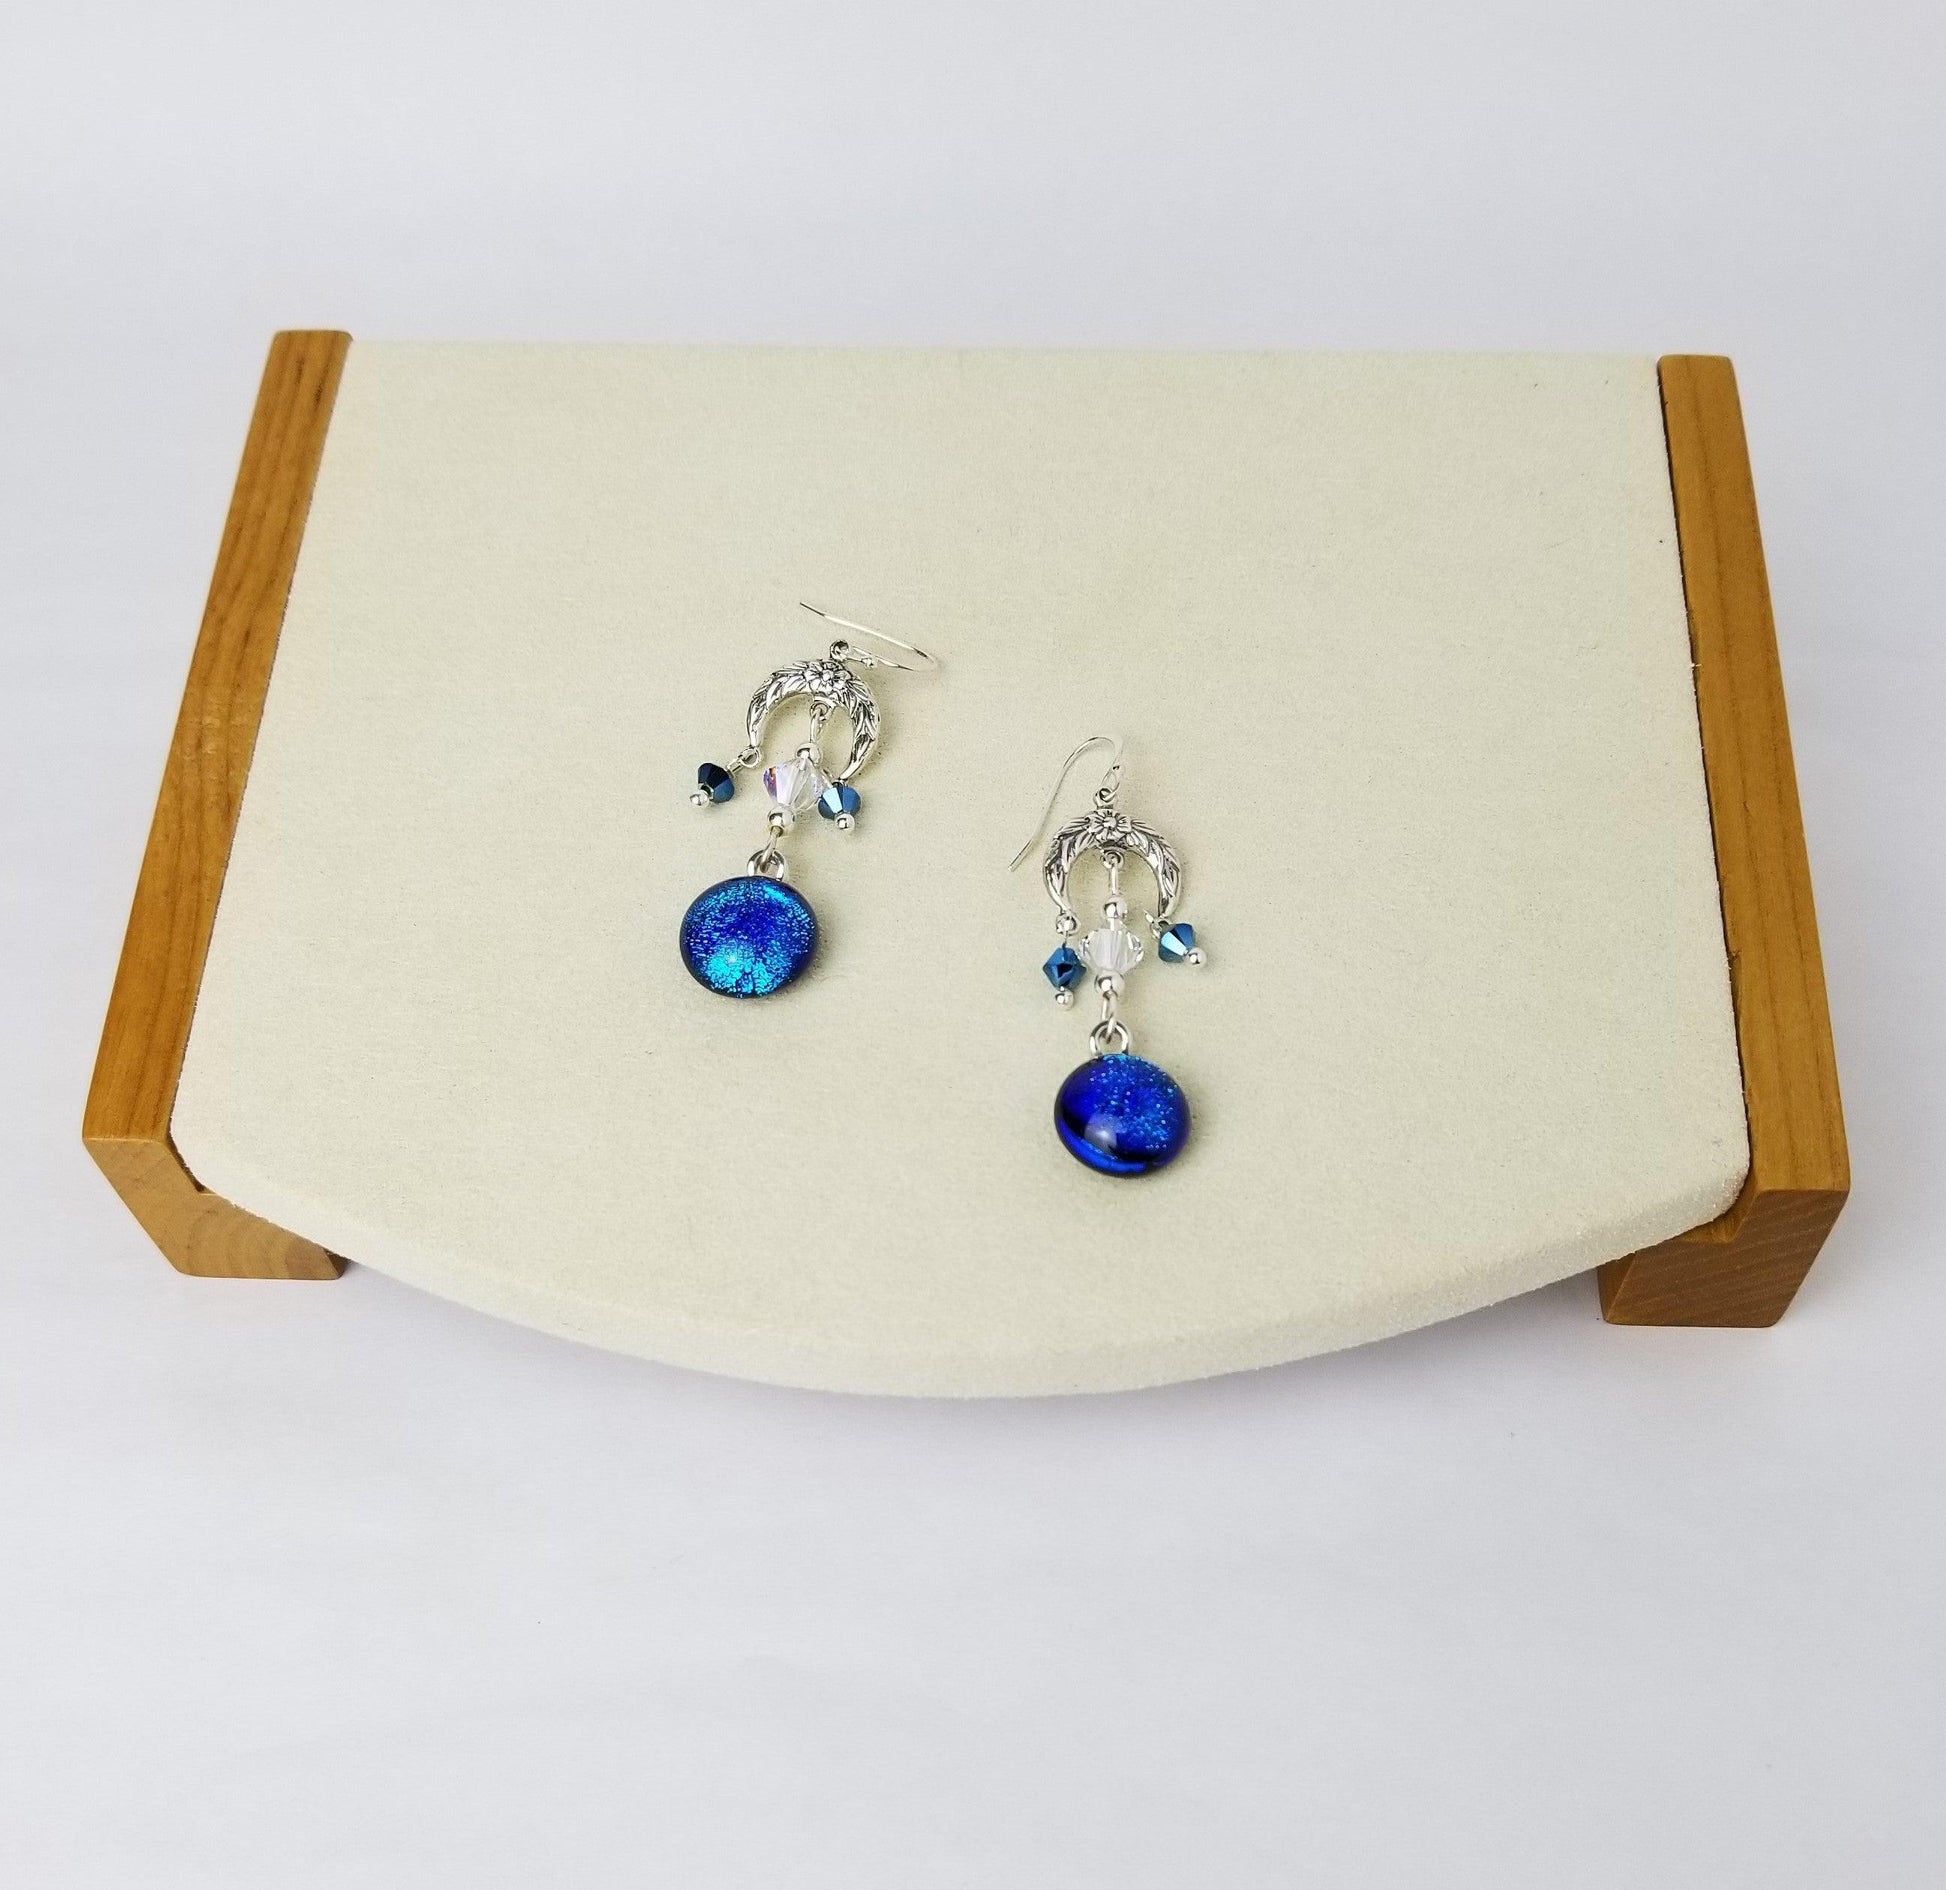 Blue Floral Crescent pireced earrings. Blue dichroic fused glass with Swarovski crystals & sterling silver by Seeds Glassworks, Seedsglassworks